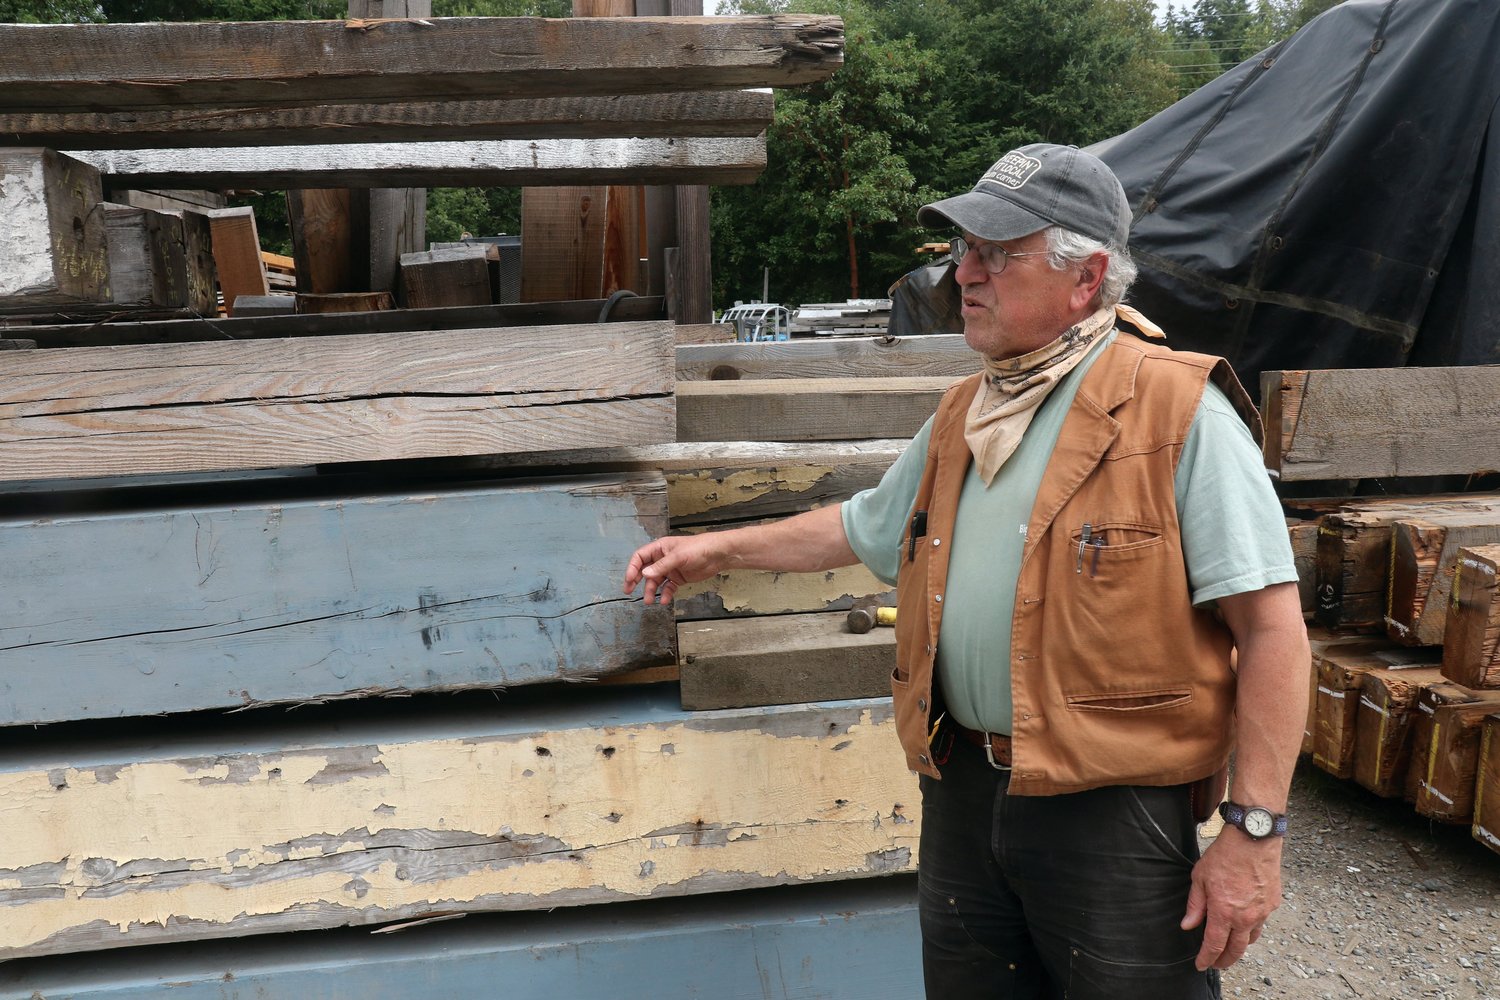 Jake Jacob of Pacific Northwest Timbers explains the provenance of the reclaimed wood that fills his lumber yard.